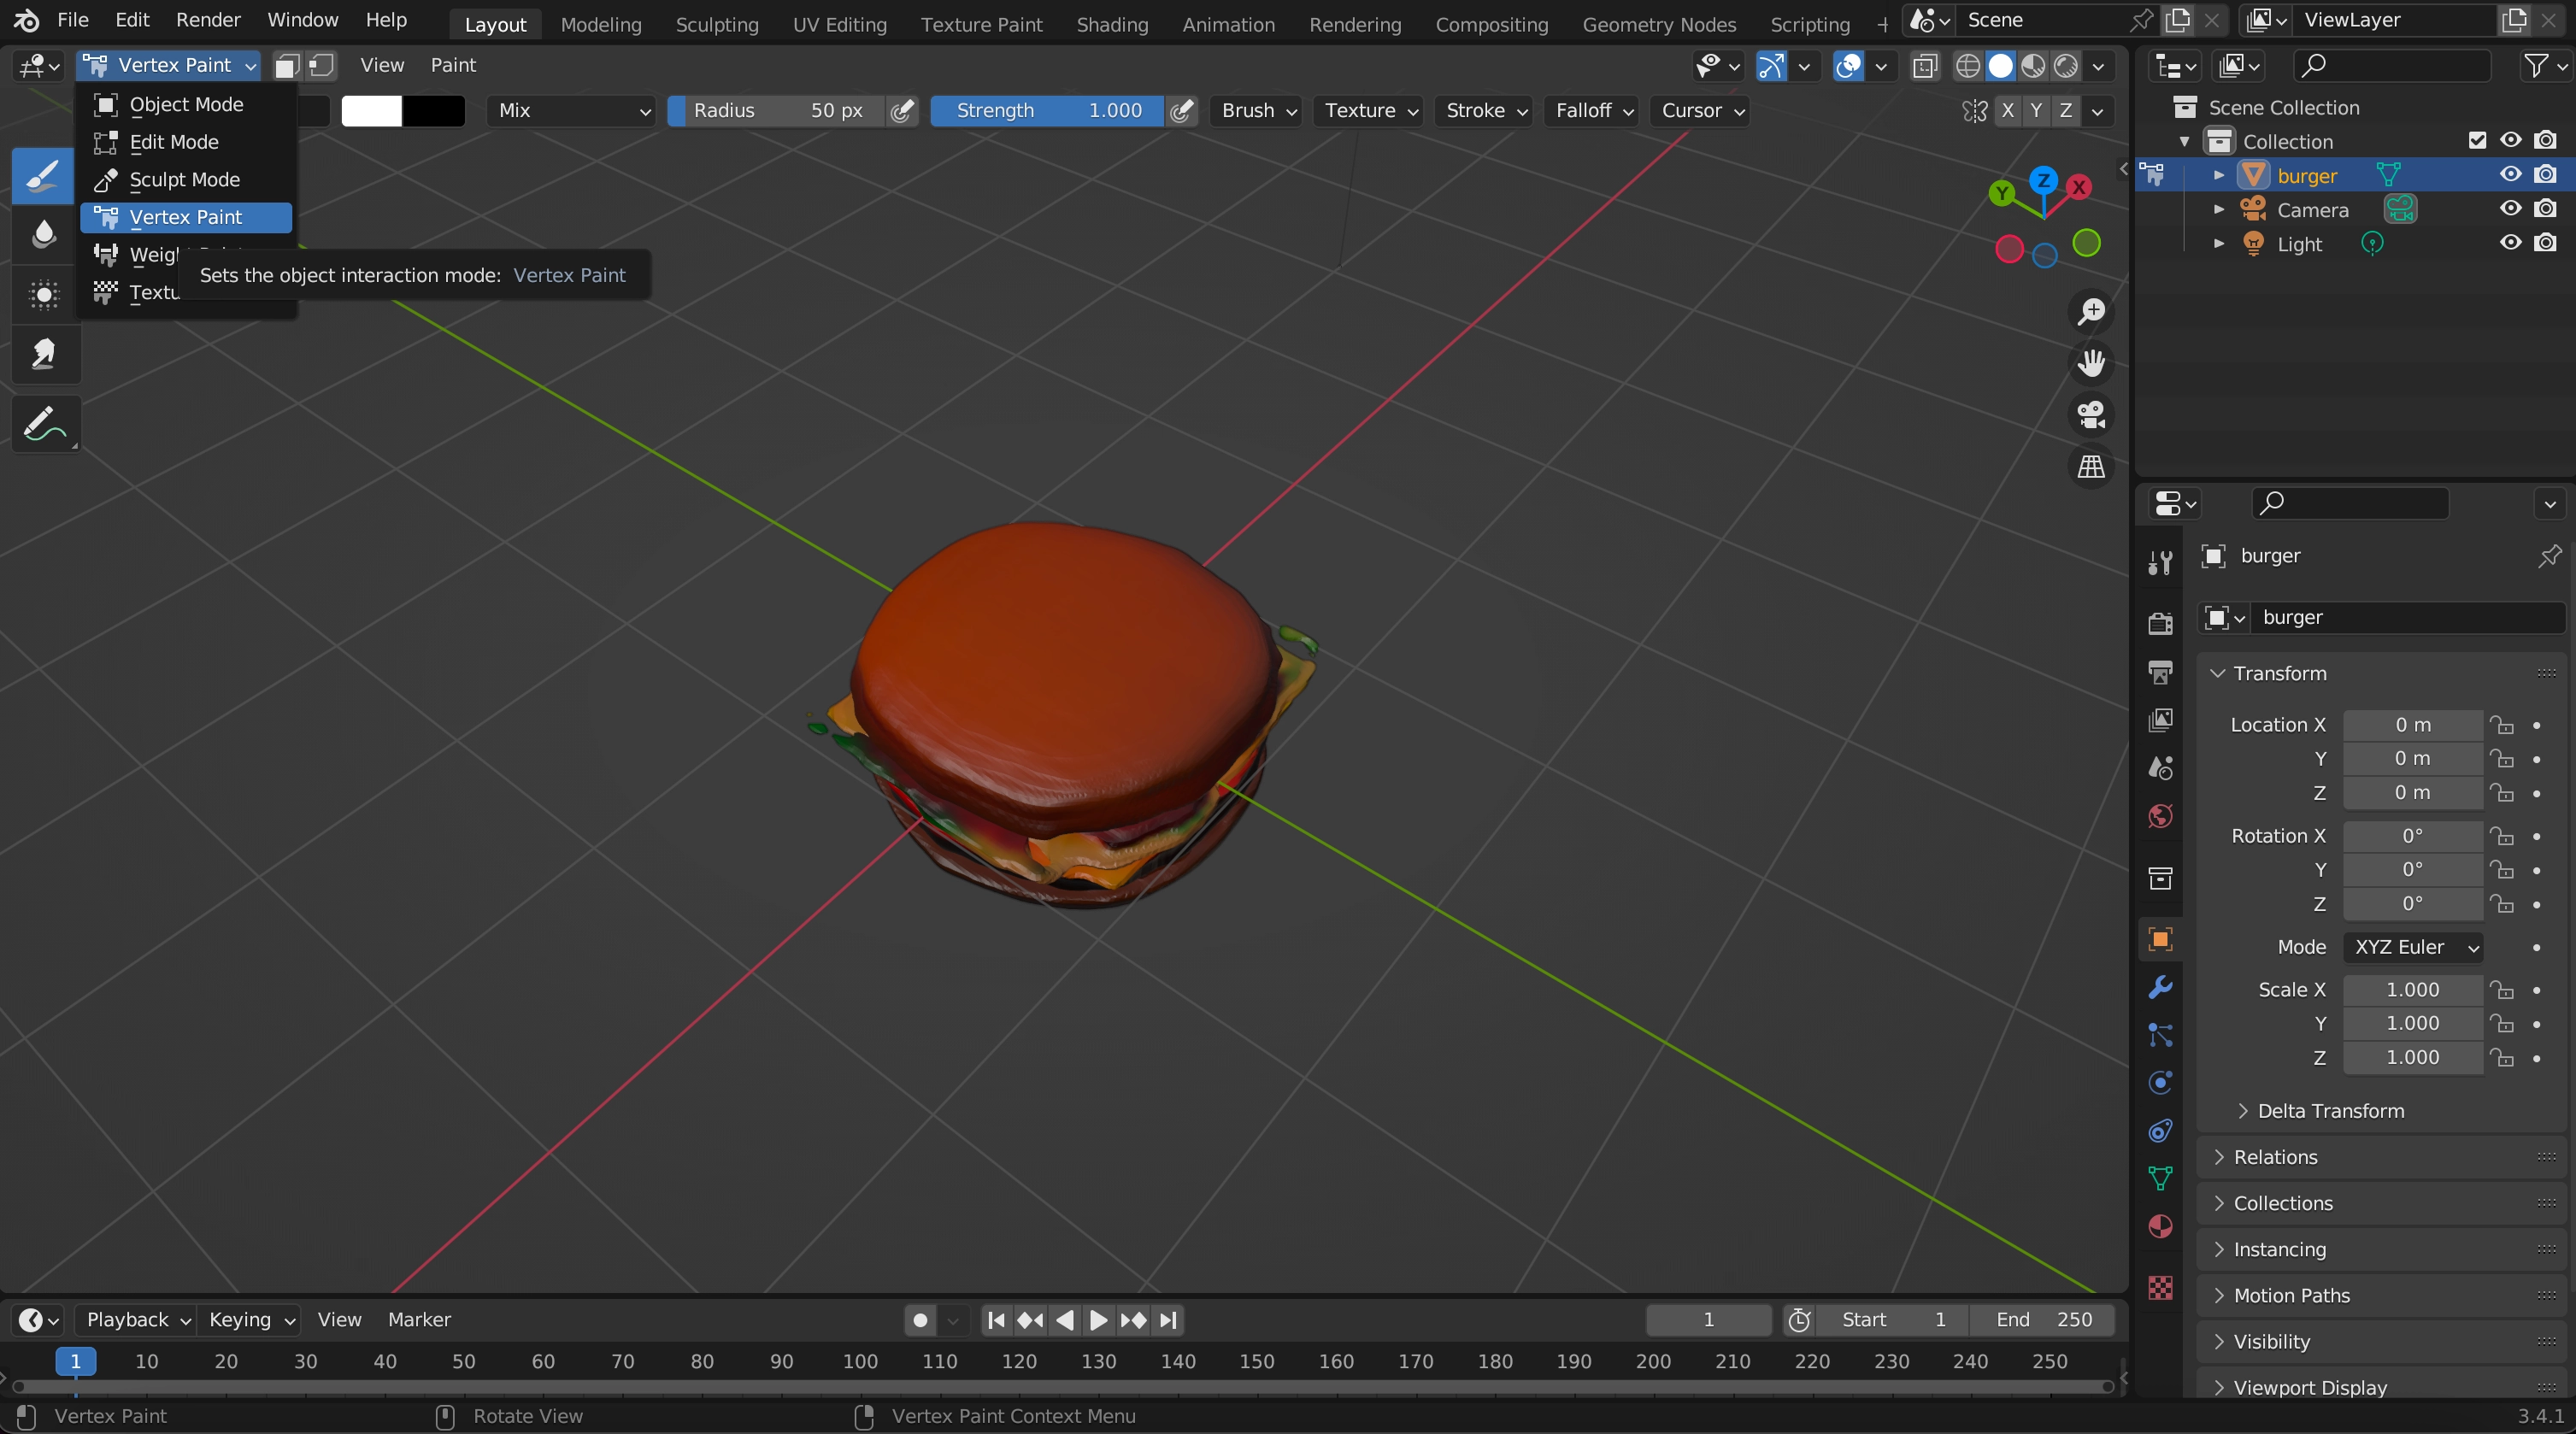 Fig. 3: [burger.ply](https://drive.google.com/file/d/16FrXoTYLj6dWvuuUTT70RZUD_pqDkw07/view?usp=sharing) file imported into **Blender**.